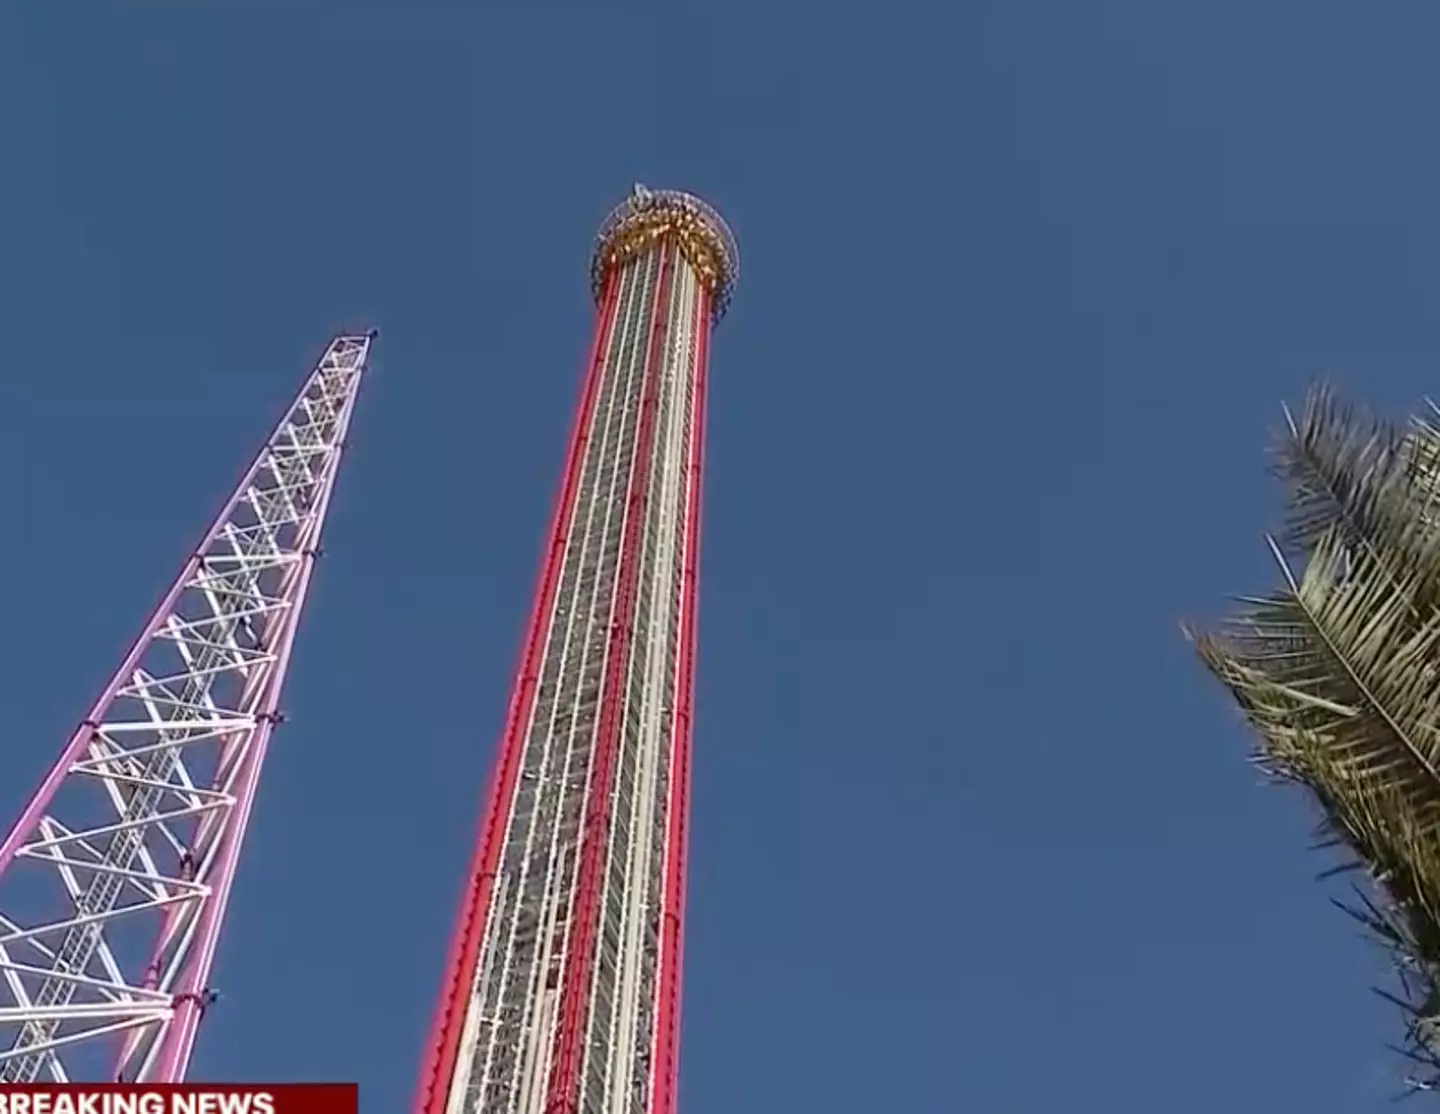 The freefall attraction at Icon Park in Orlando.